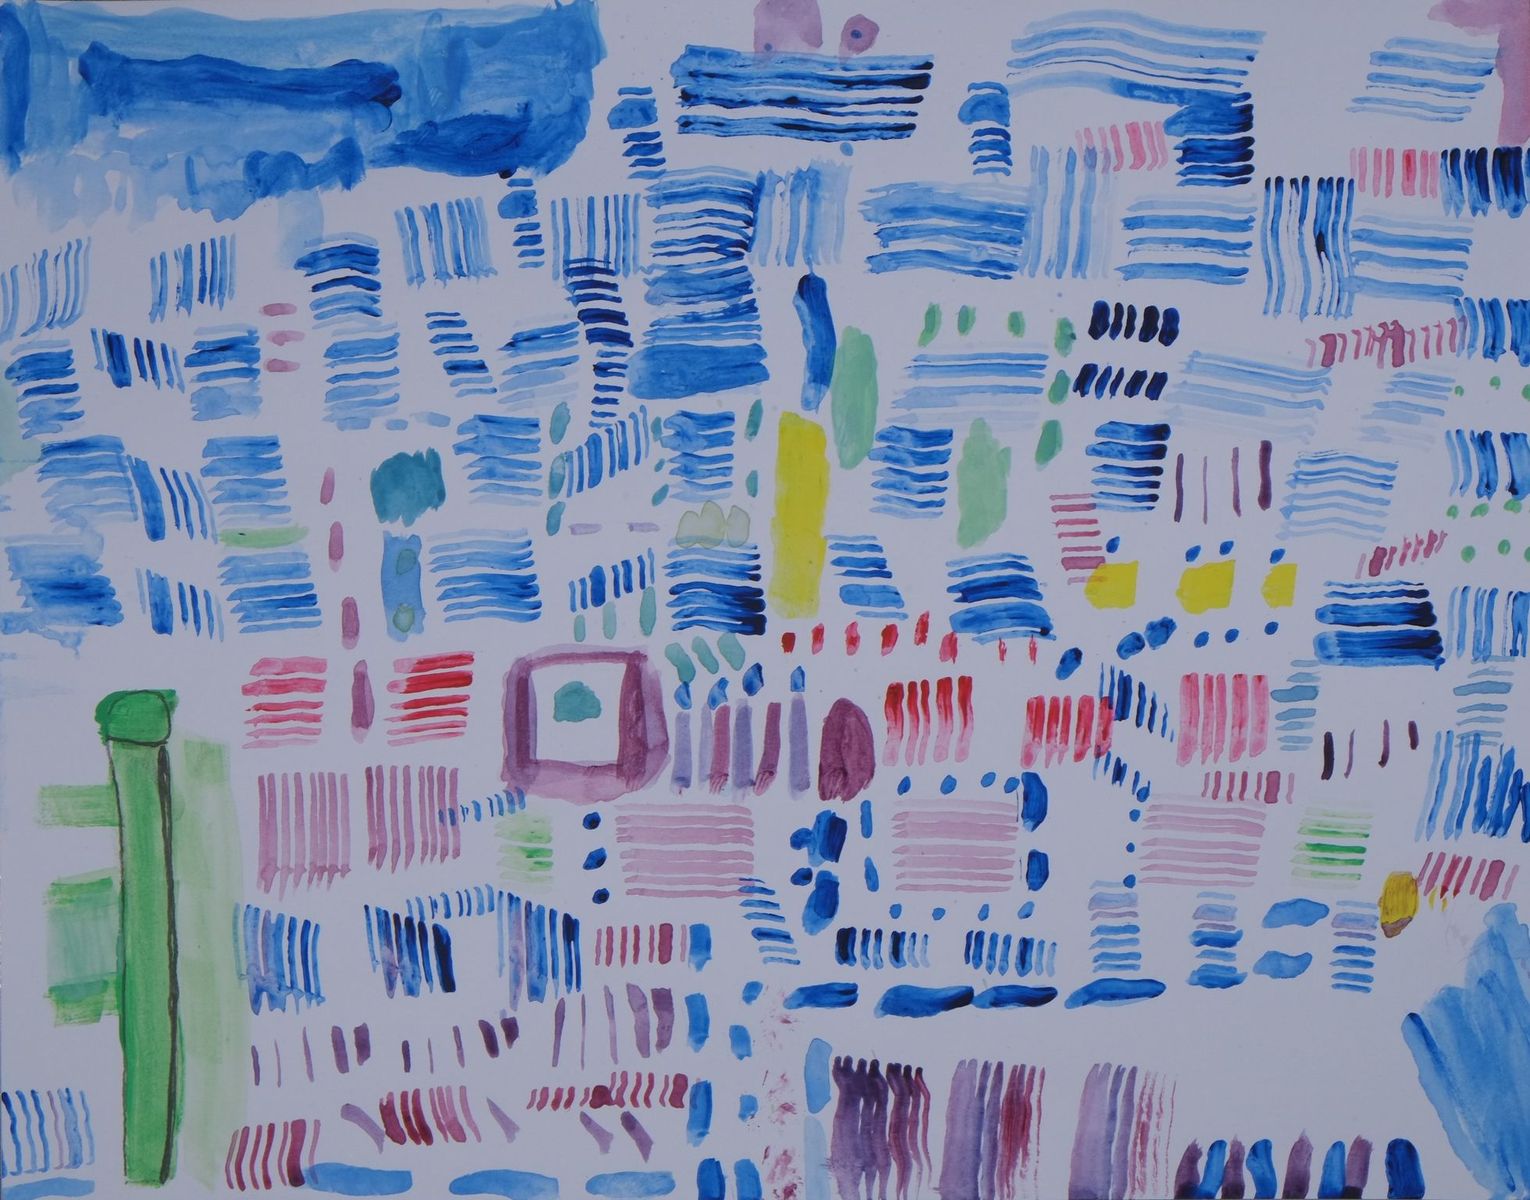 Acrylic and pencil on paper artwork with white background and various horizontal and vertical line patterns in red, blue and yellow with green accents